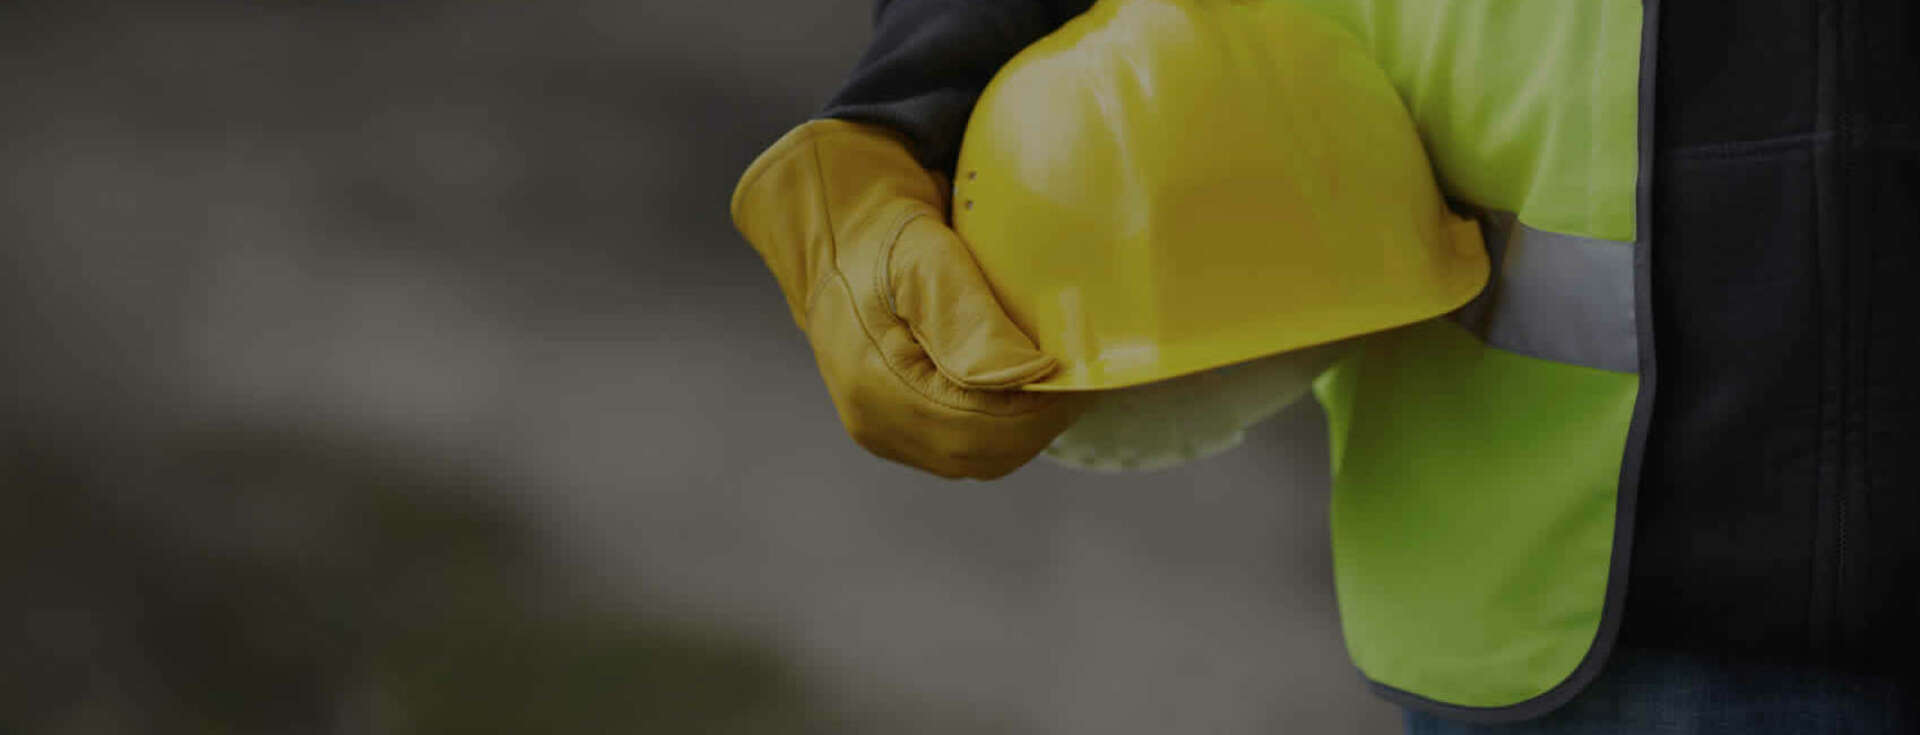 construction worker holding a yellow hard-hat at their side.